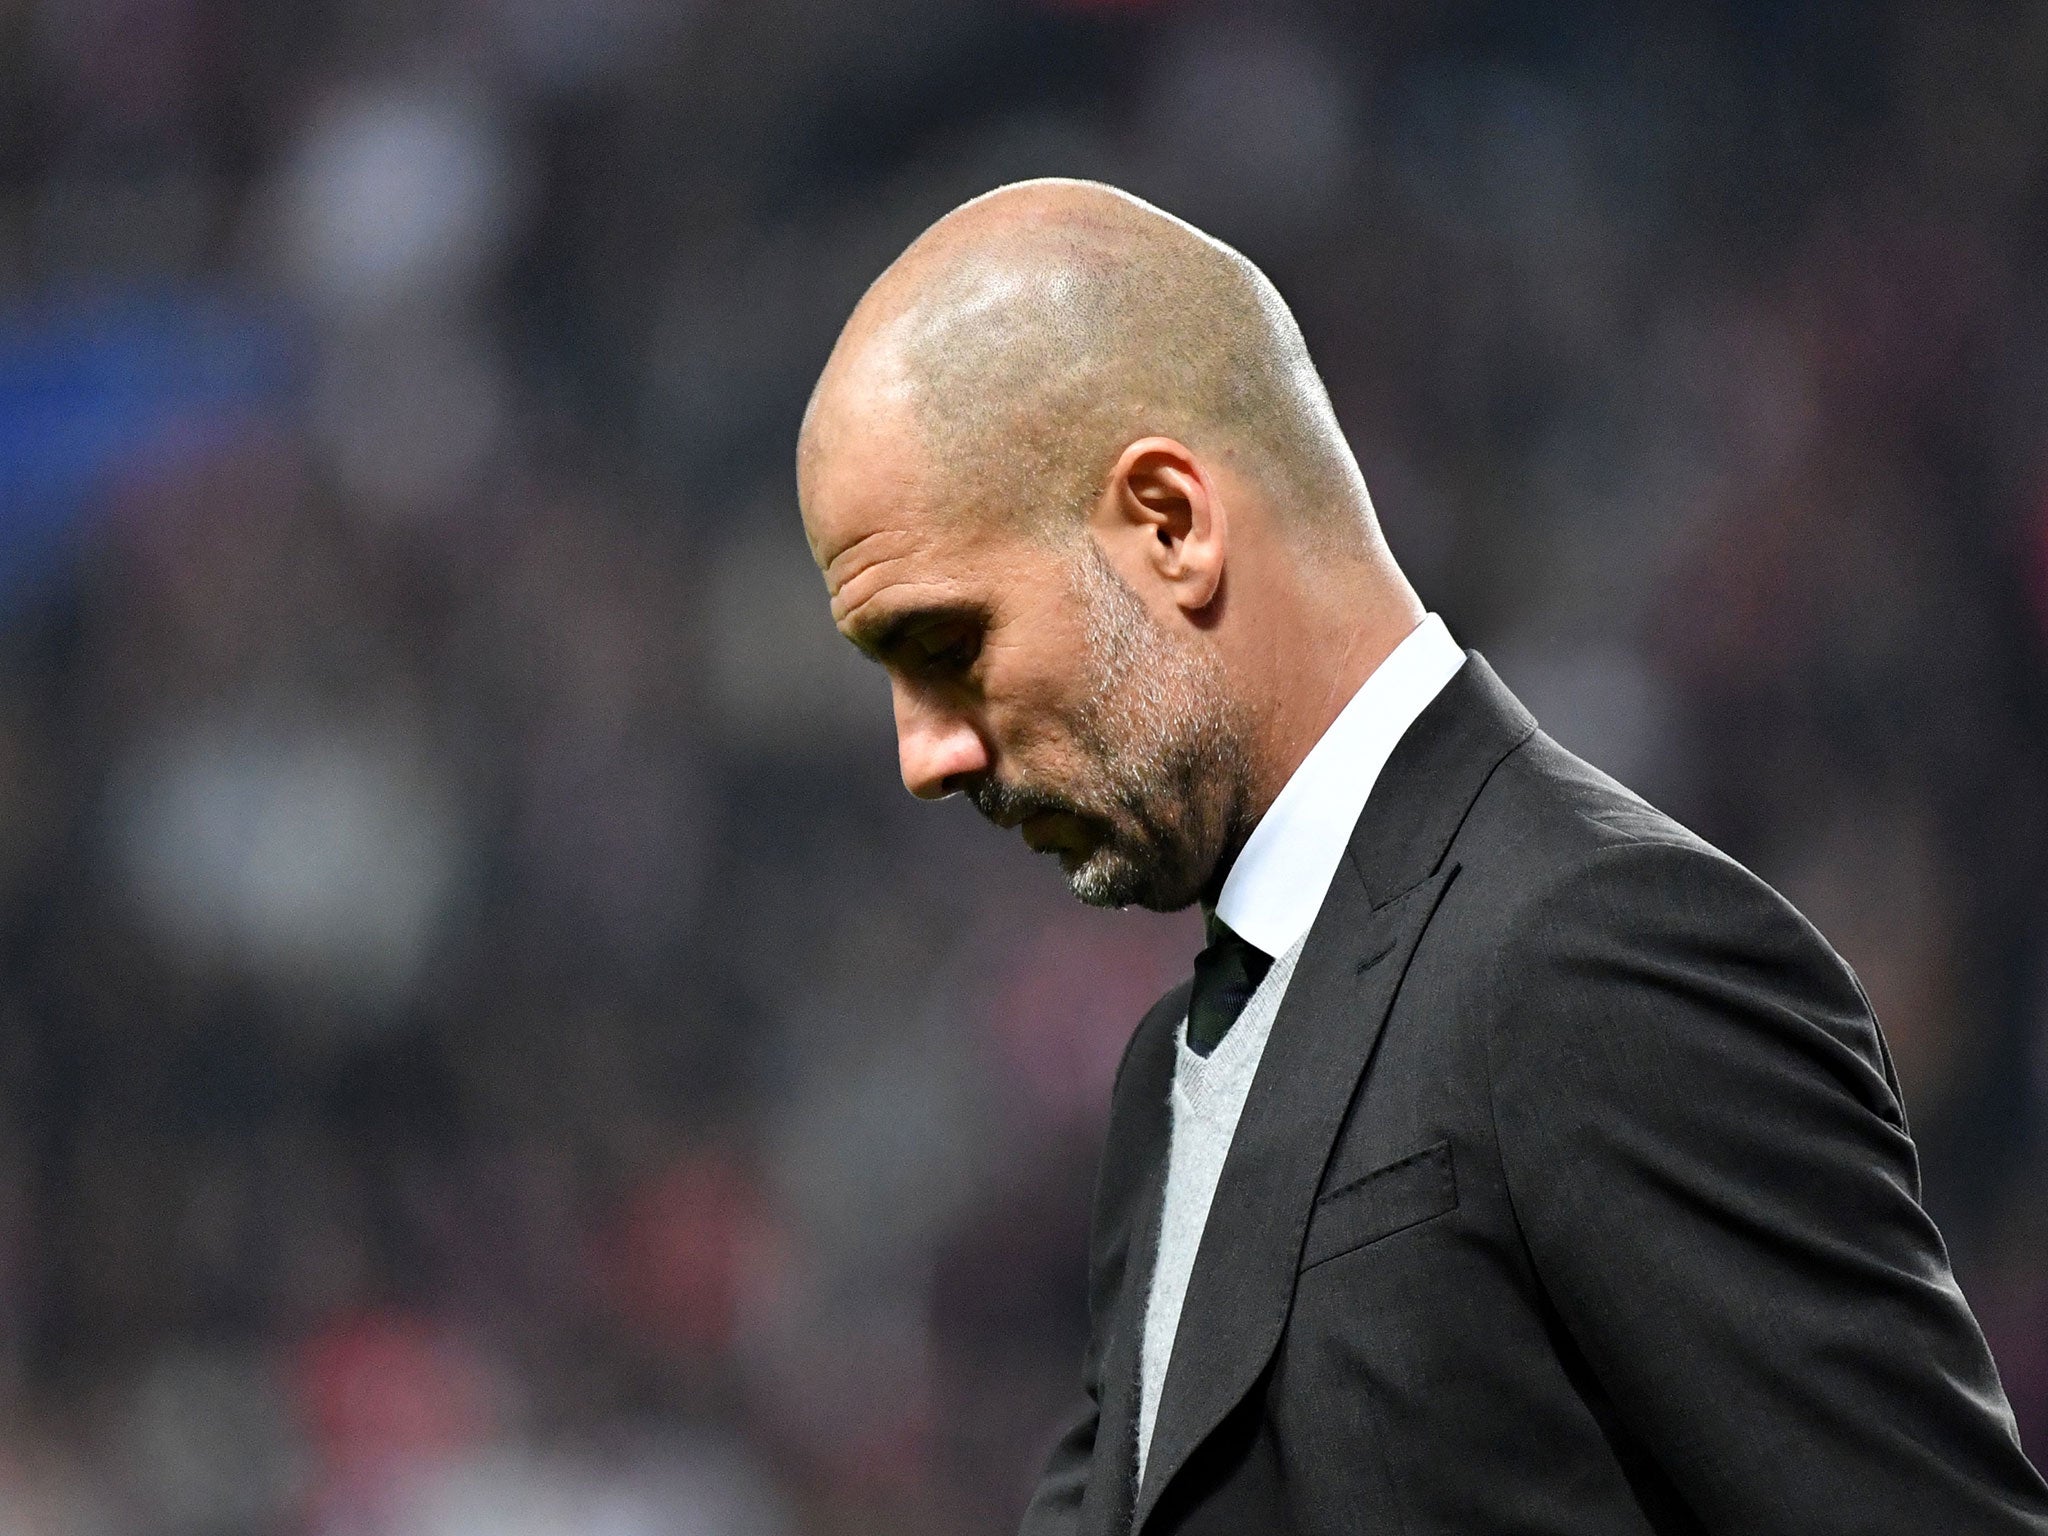 Pep Guardiola failed to live up to the hype in his first season in charge